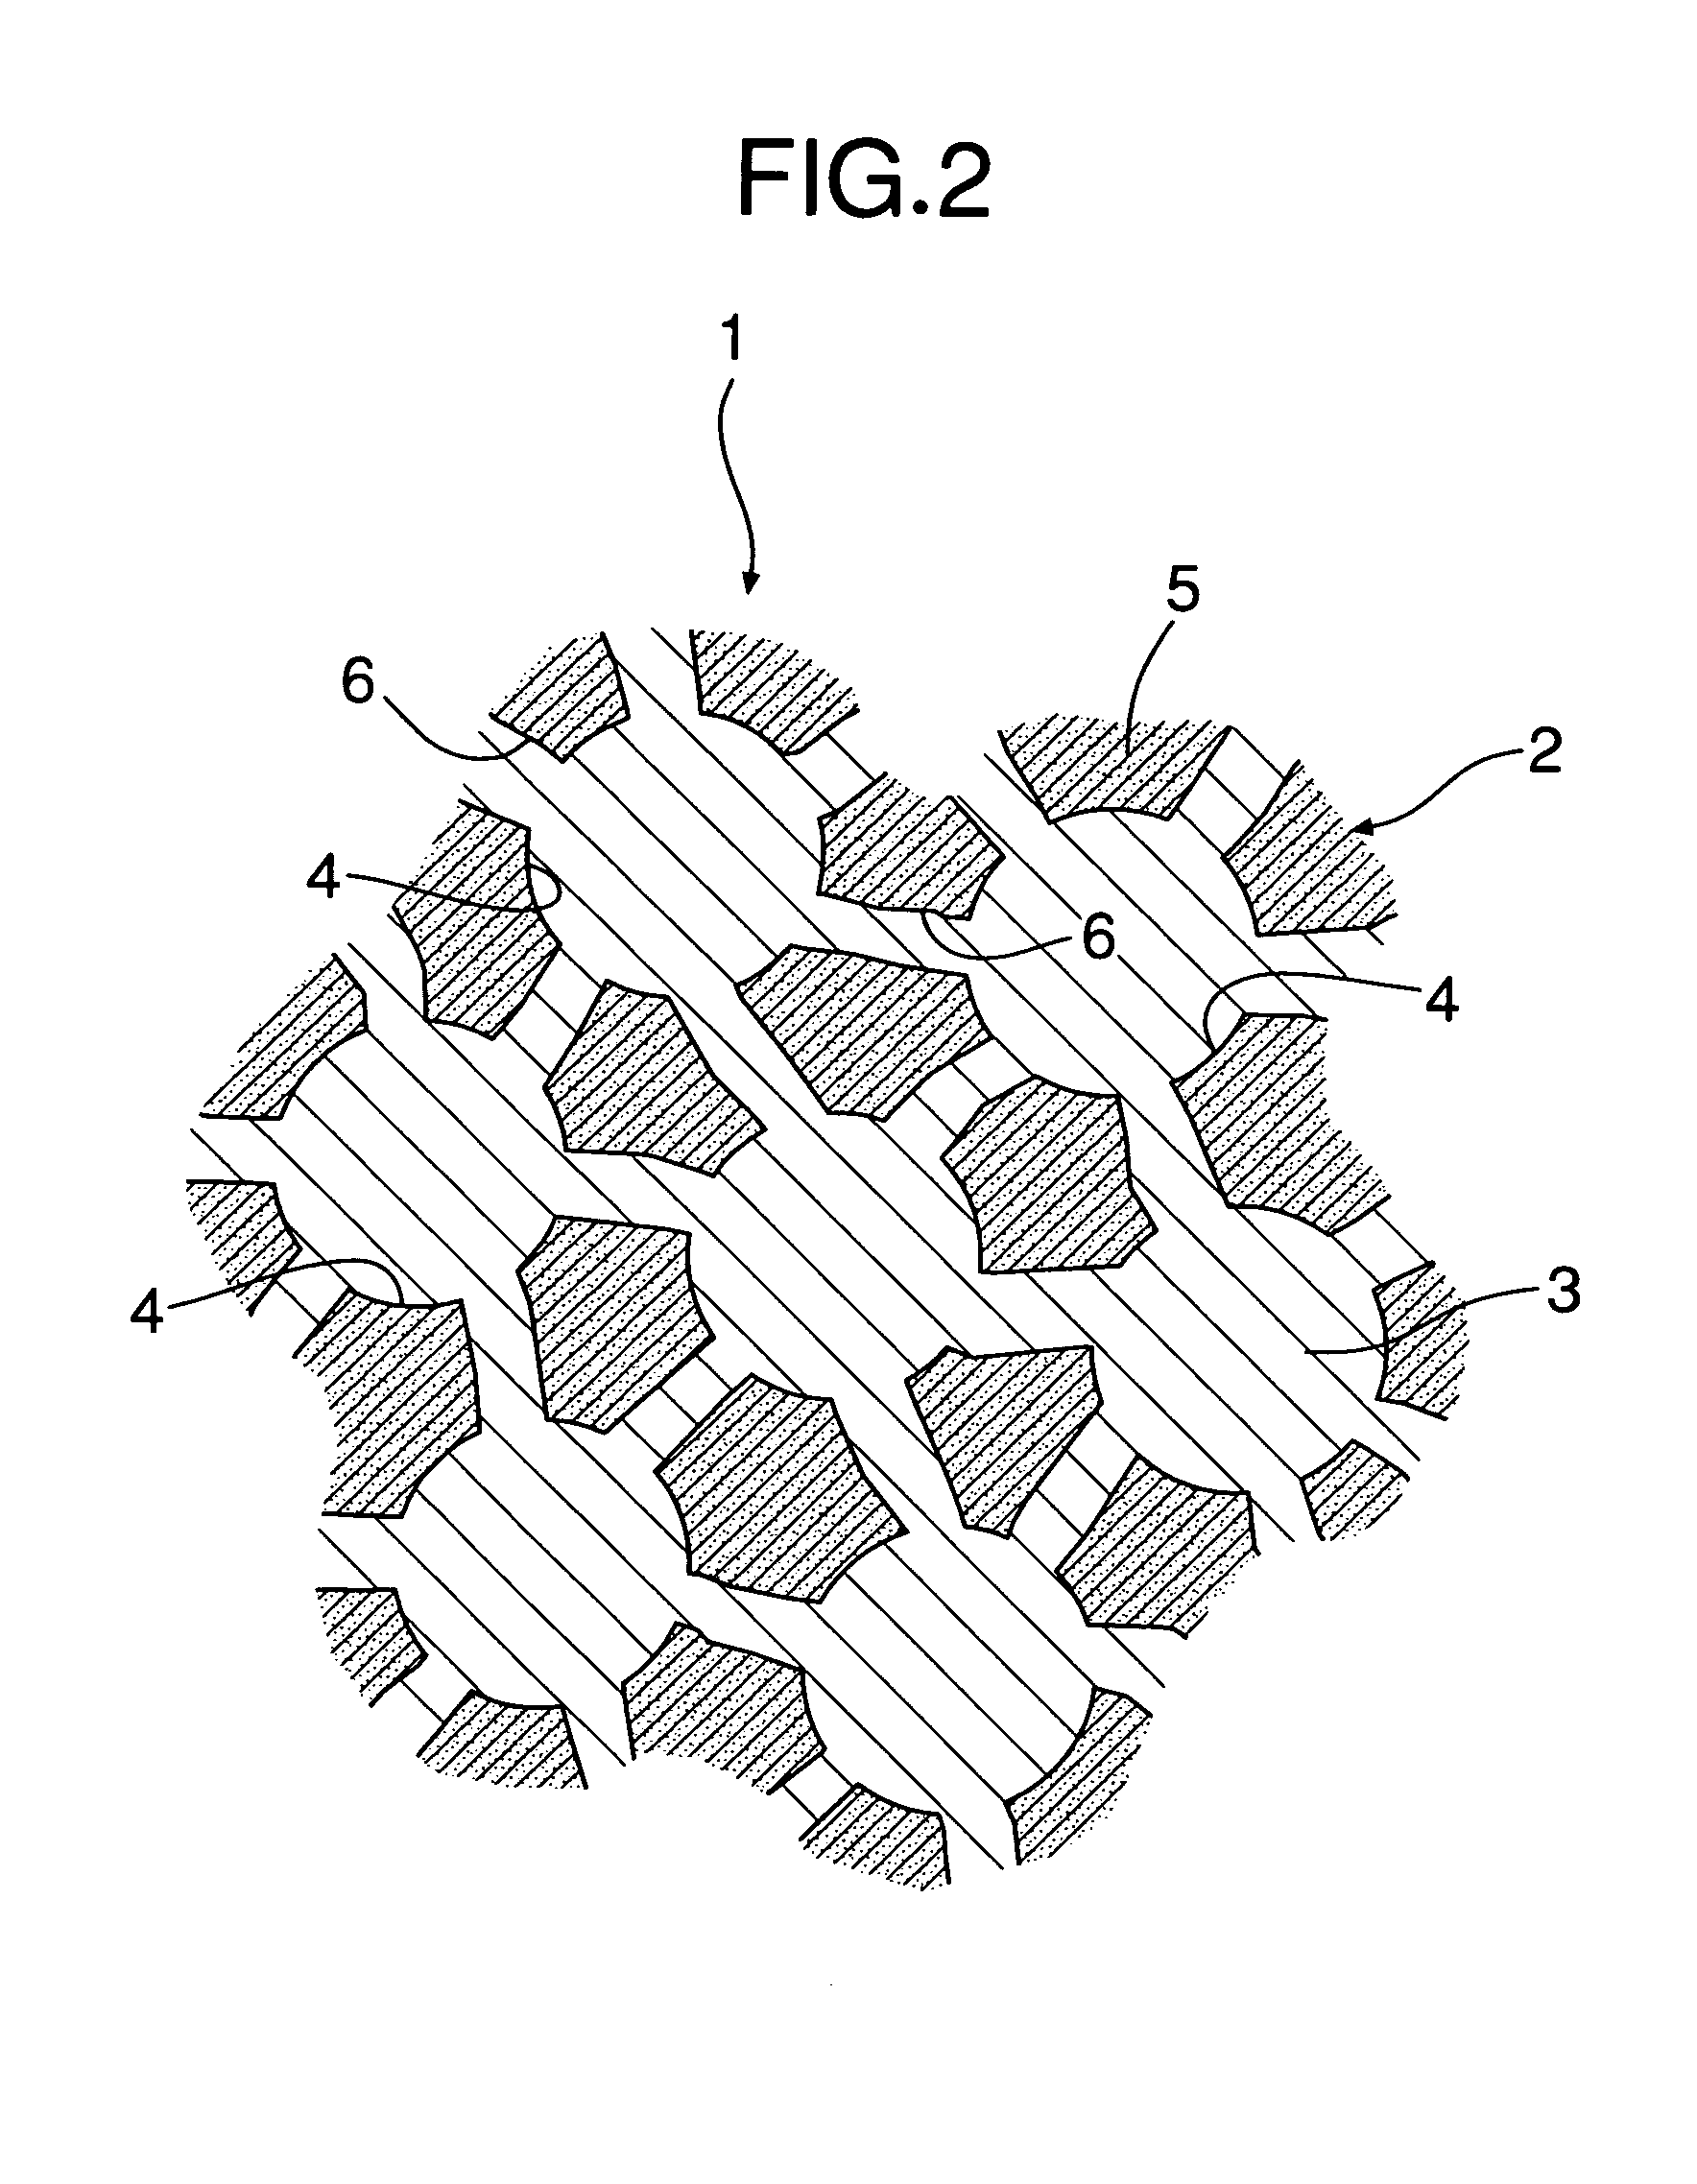 Process for producing ceramic molding having three-dimensional network structure